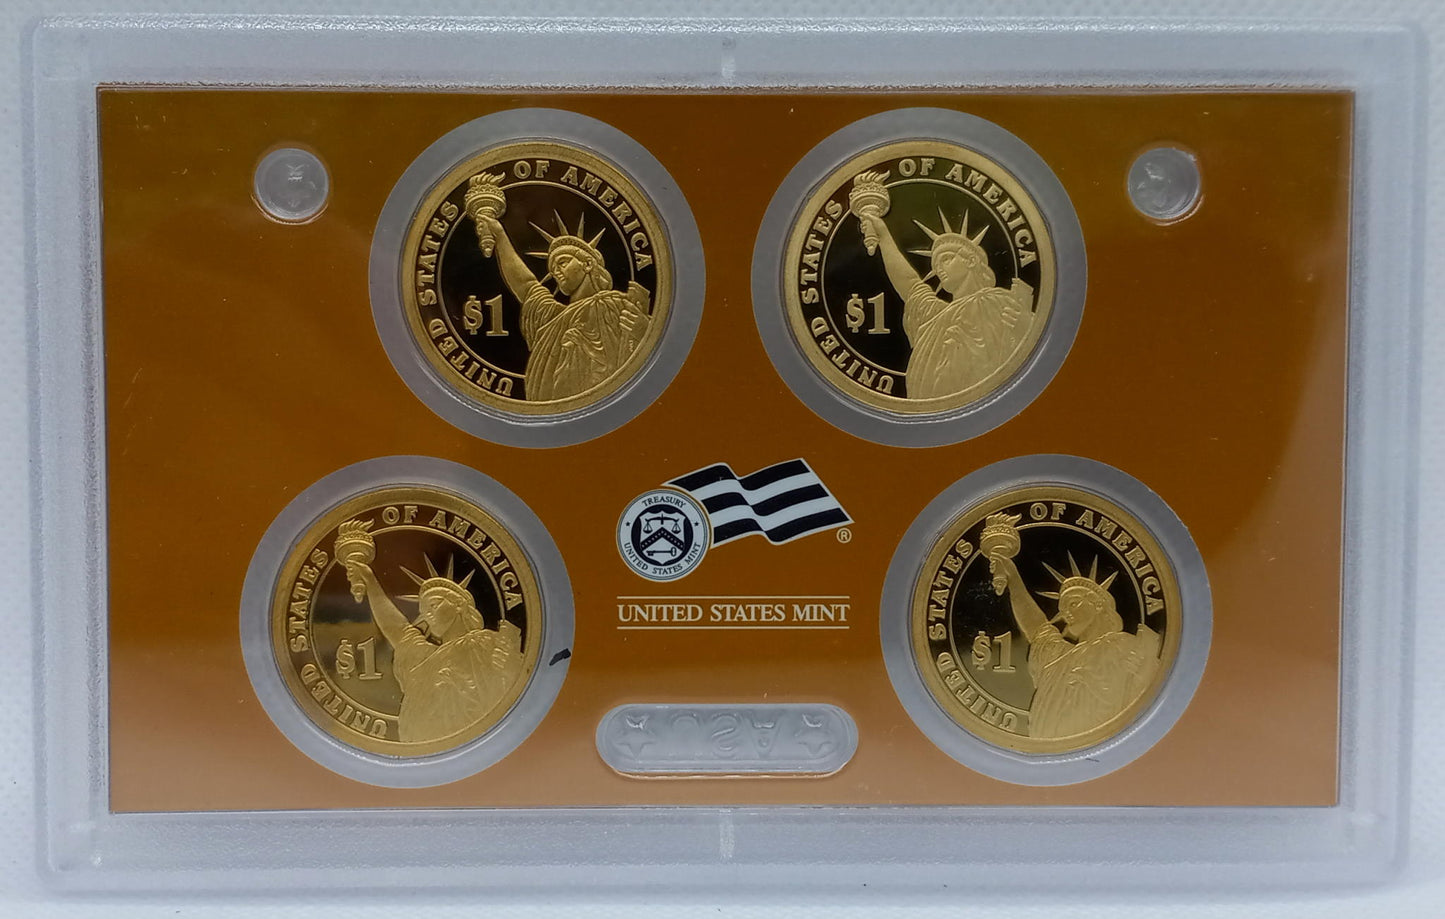 2007 United States Mint PRESIDENTIAL DOLLAR COIN PROOF SET With OGP & COA!